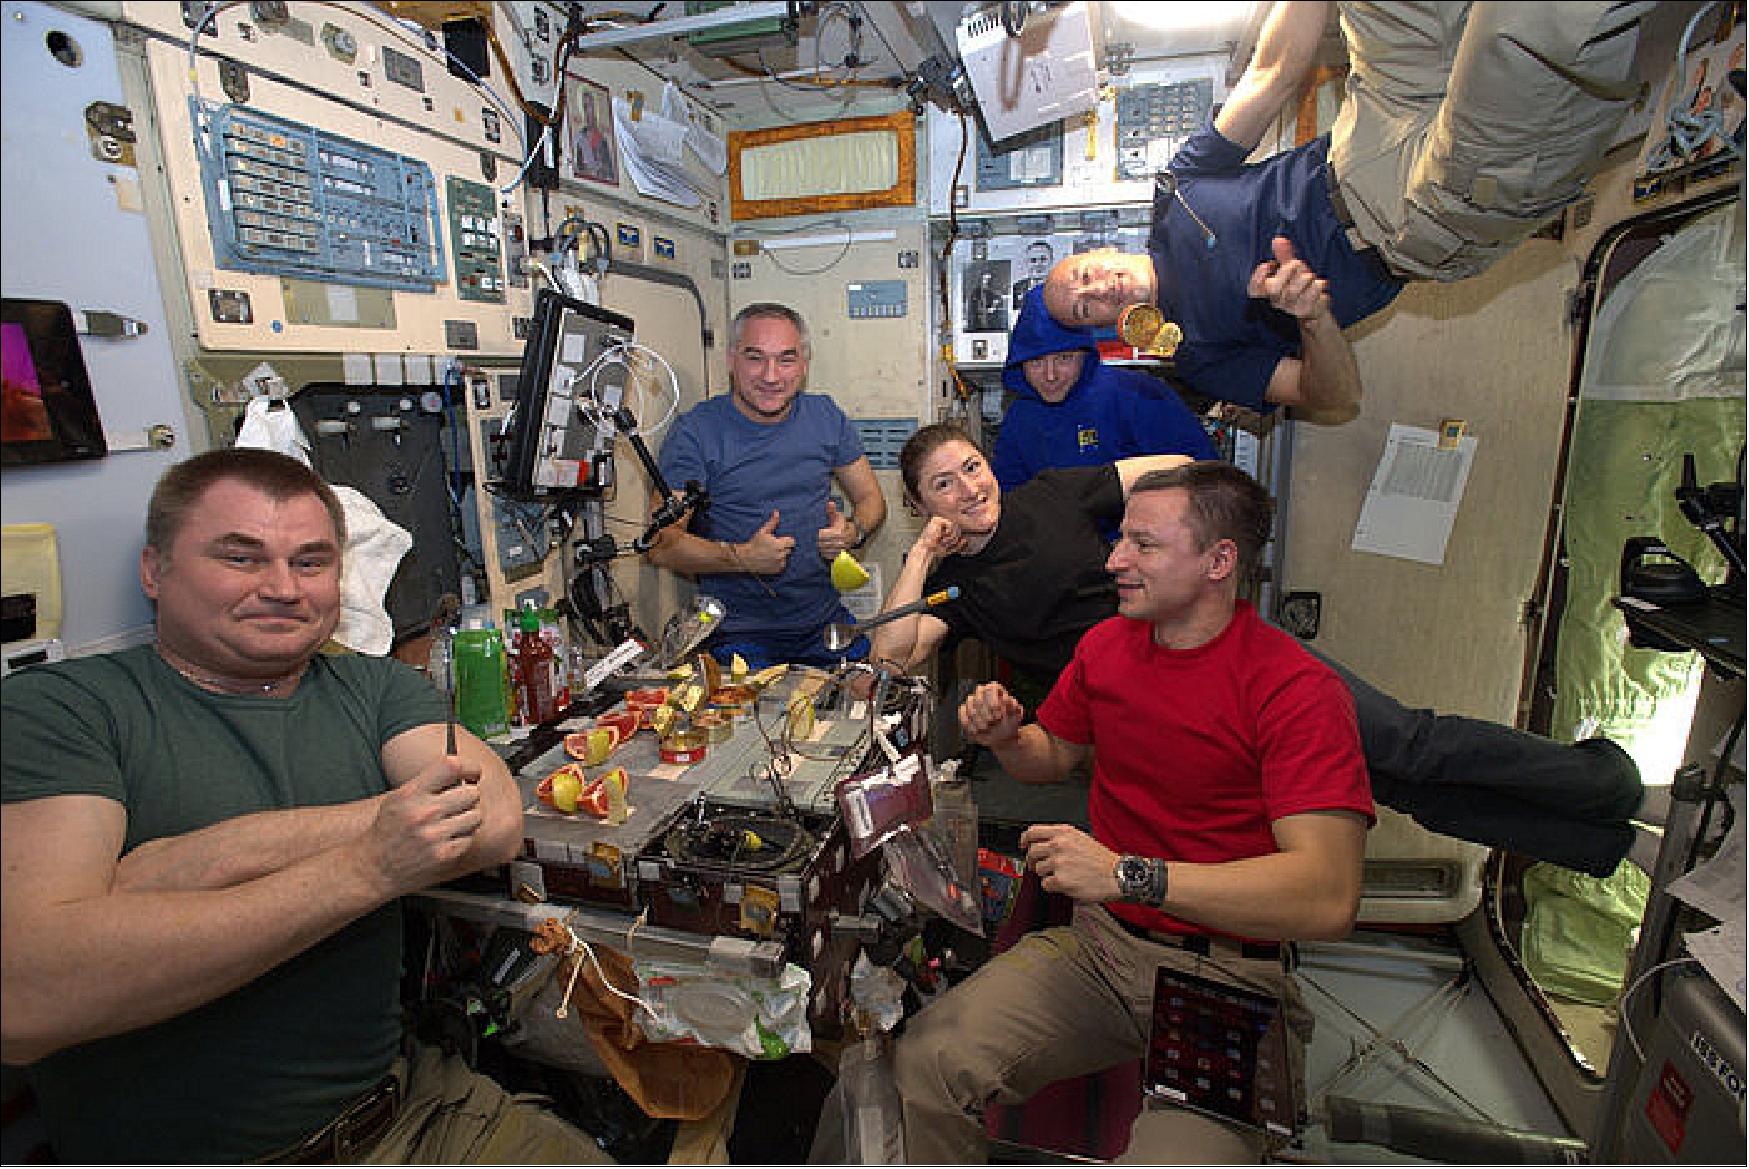 Figure 51: ESA astronaut Luca Parmitano shares a light dinner with his Expedition 60 crewmates on the International Space Station. Luca posted this image to social media during his Beyond mission with the caption: Among friends for a light dinner ... so light that everything flies (image credit: ESA7NASA)